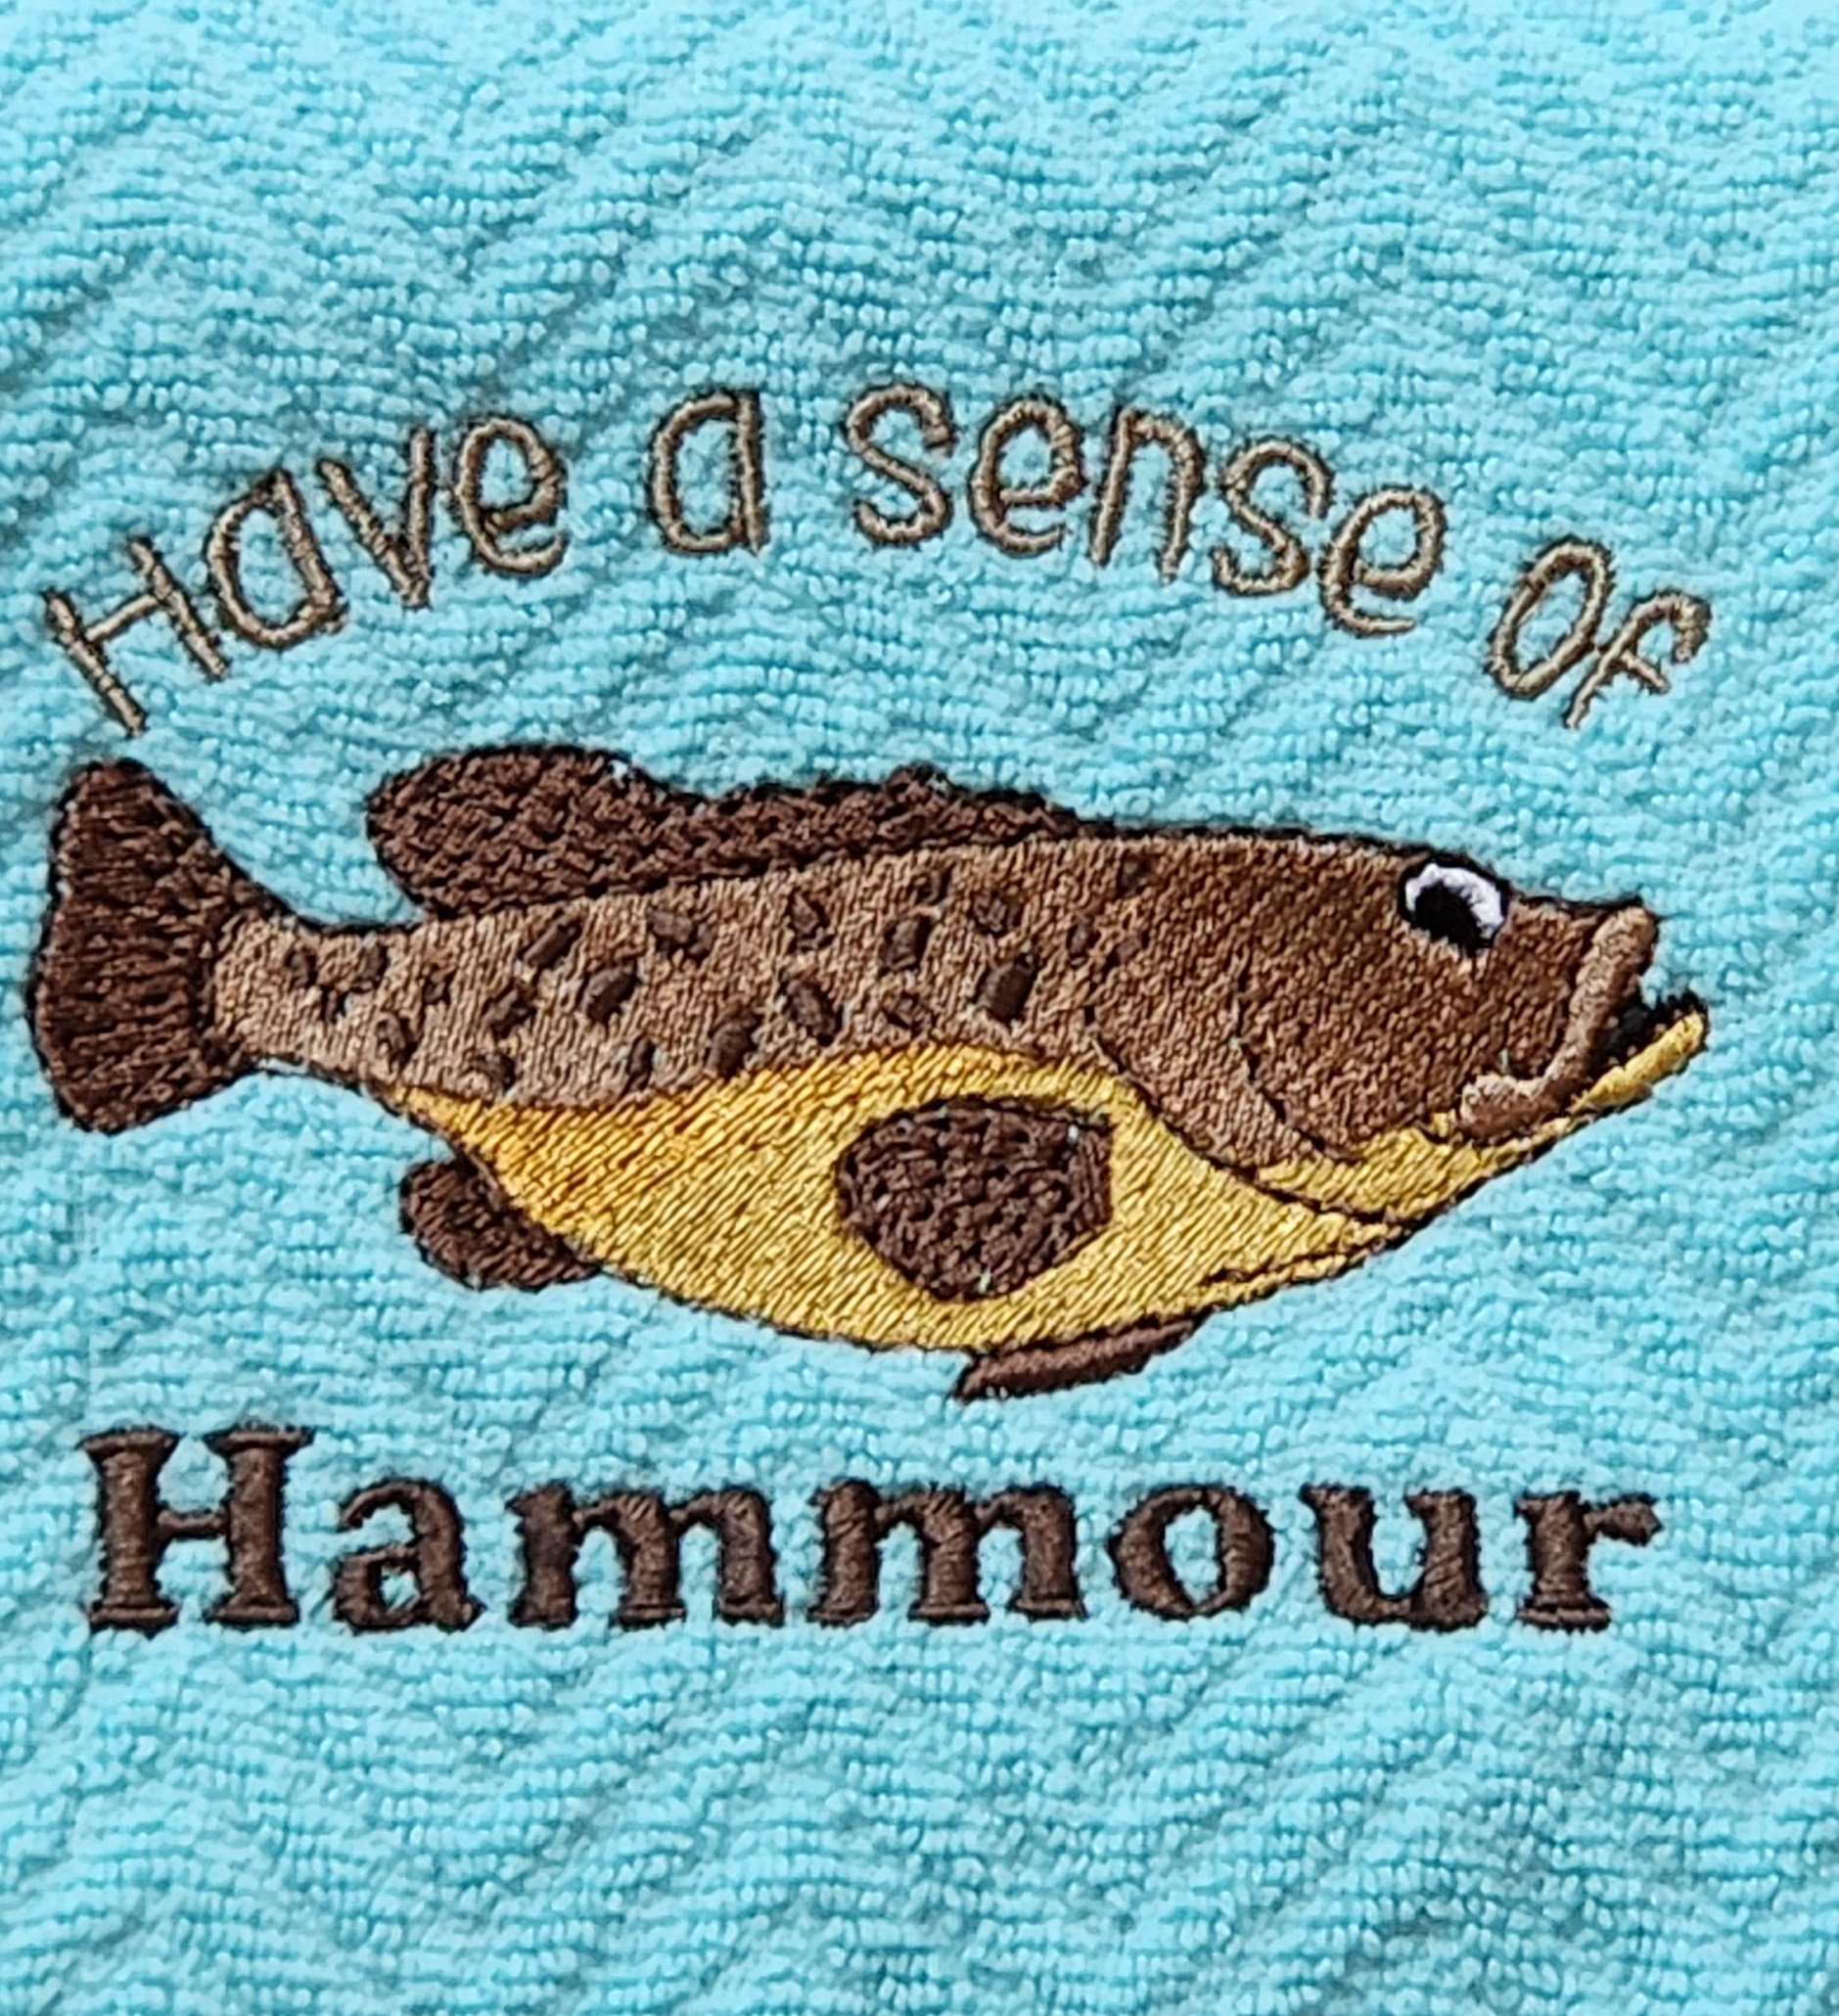 FISHING Embroidered HAND TOWEL Have a Crappie Day Fish Designs on Hand  Towels Home Decor Bass Saying Fish Dishtowel for Fisherman 